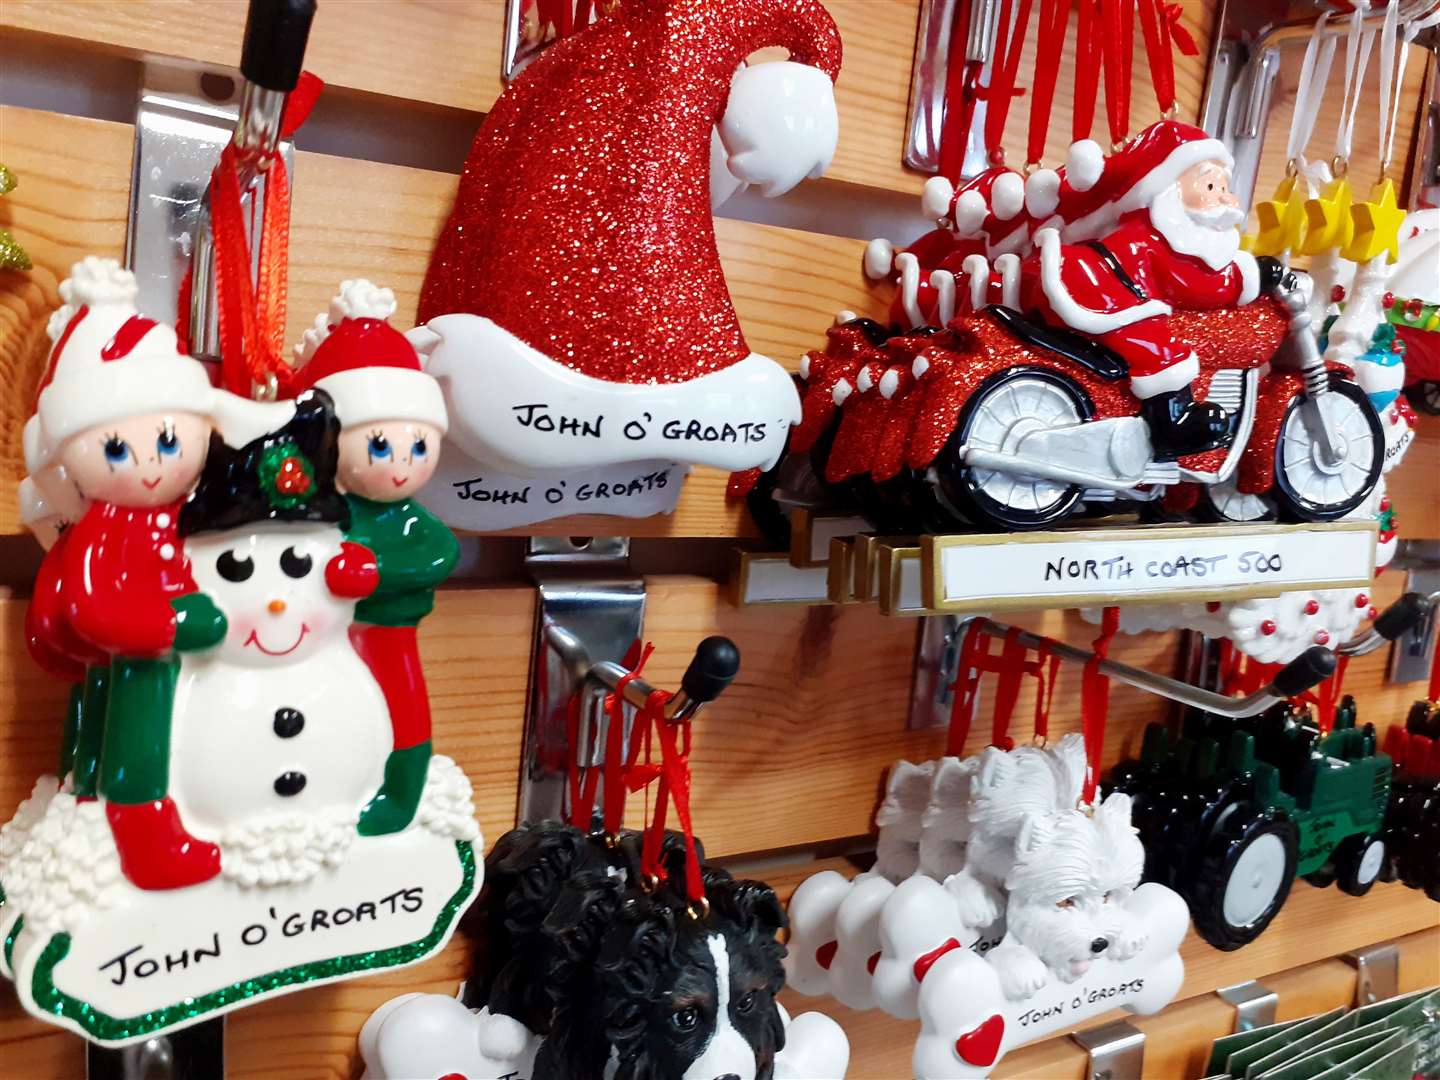 Some of the seasonal decorations on sale in the Groatie Buckie Gift Shop.